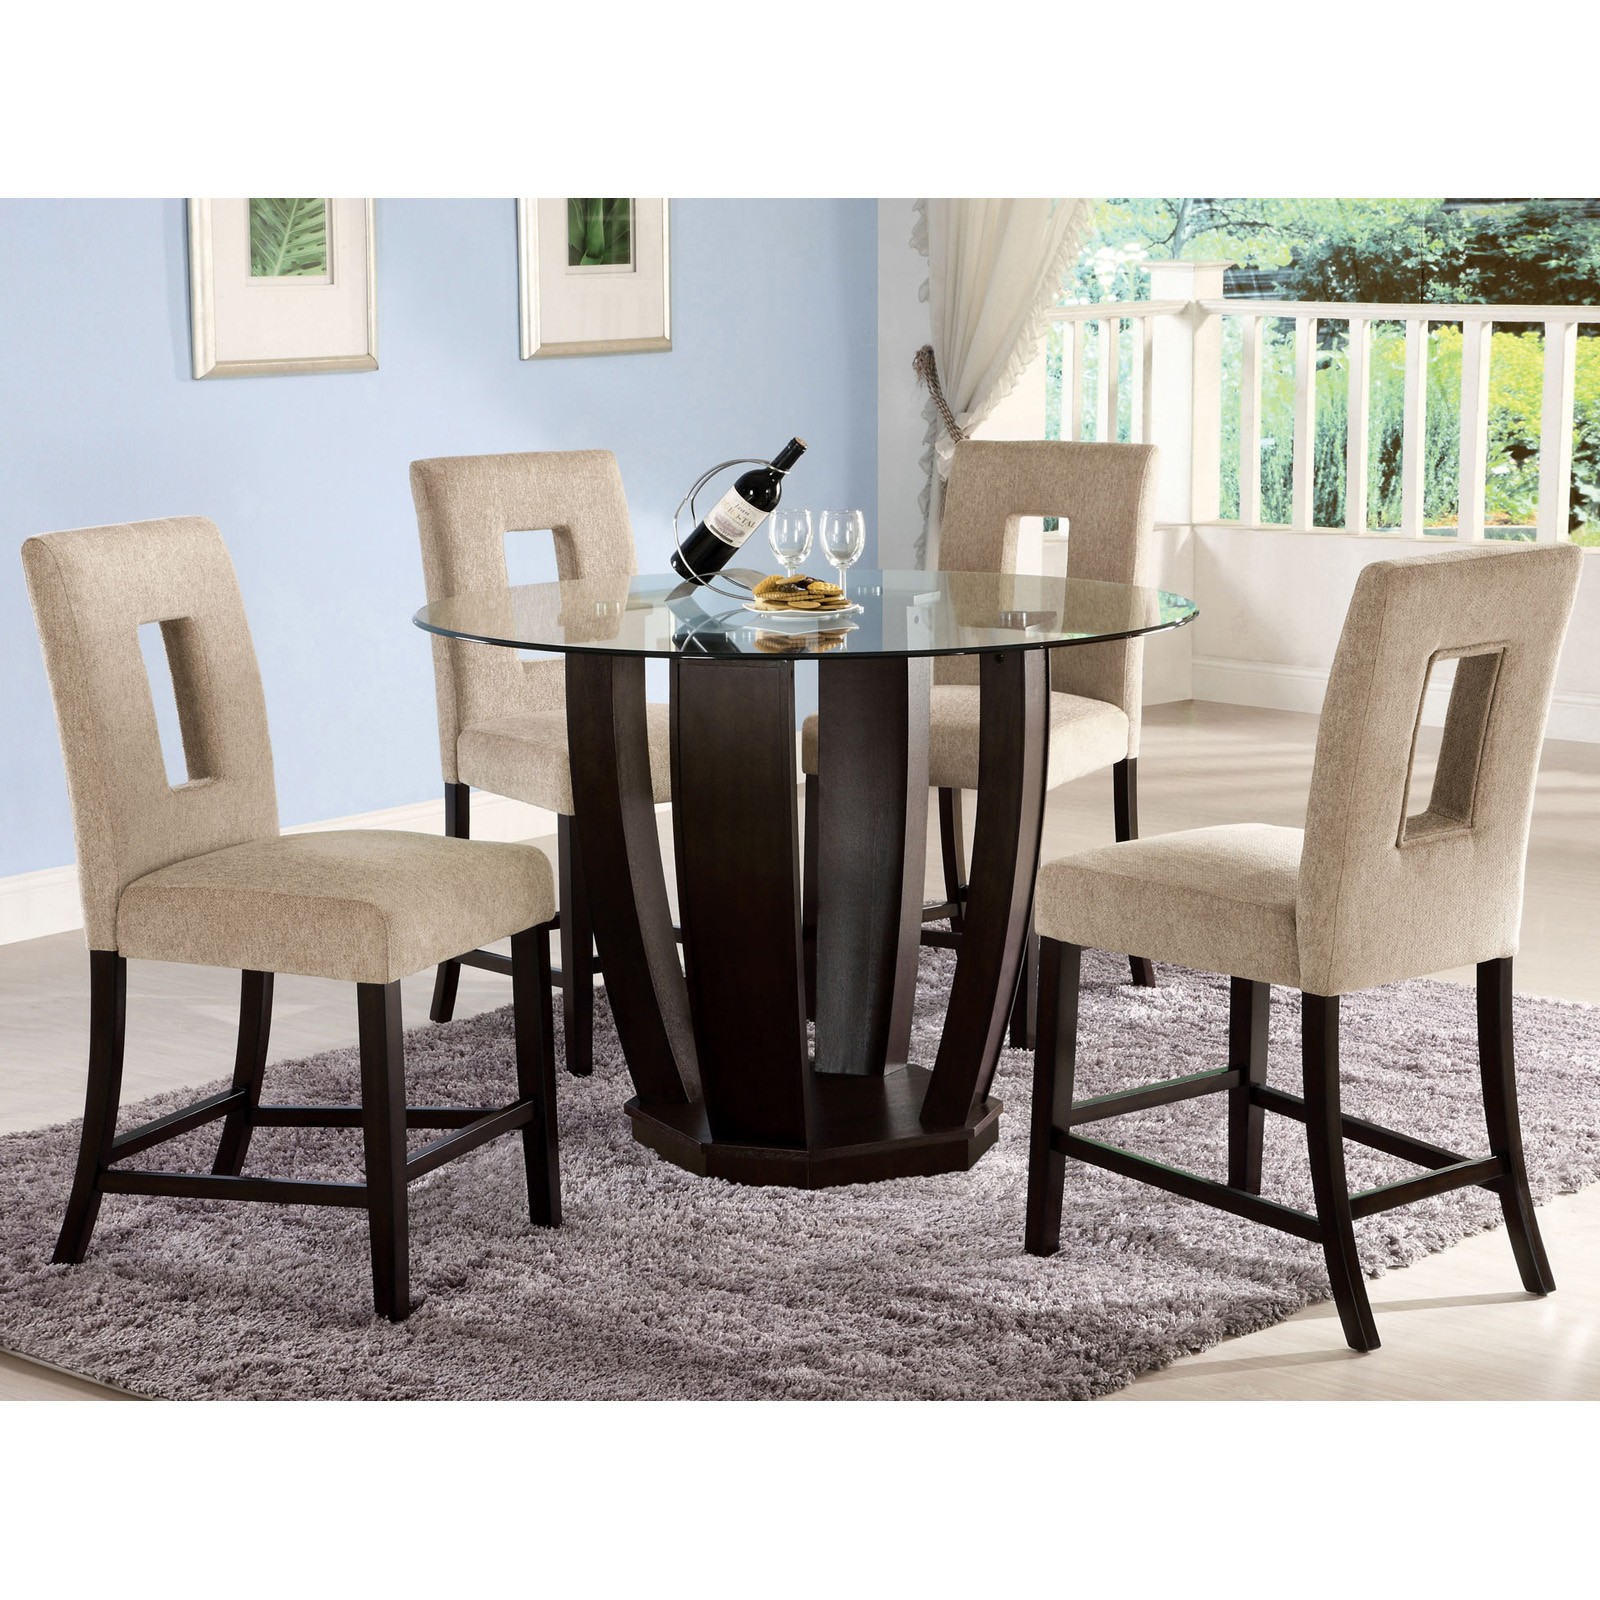 Expandable counter height dining sets